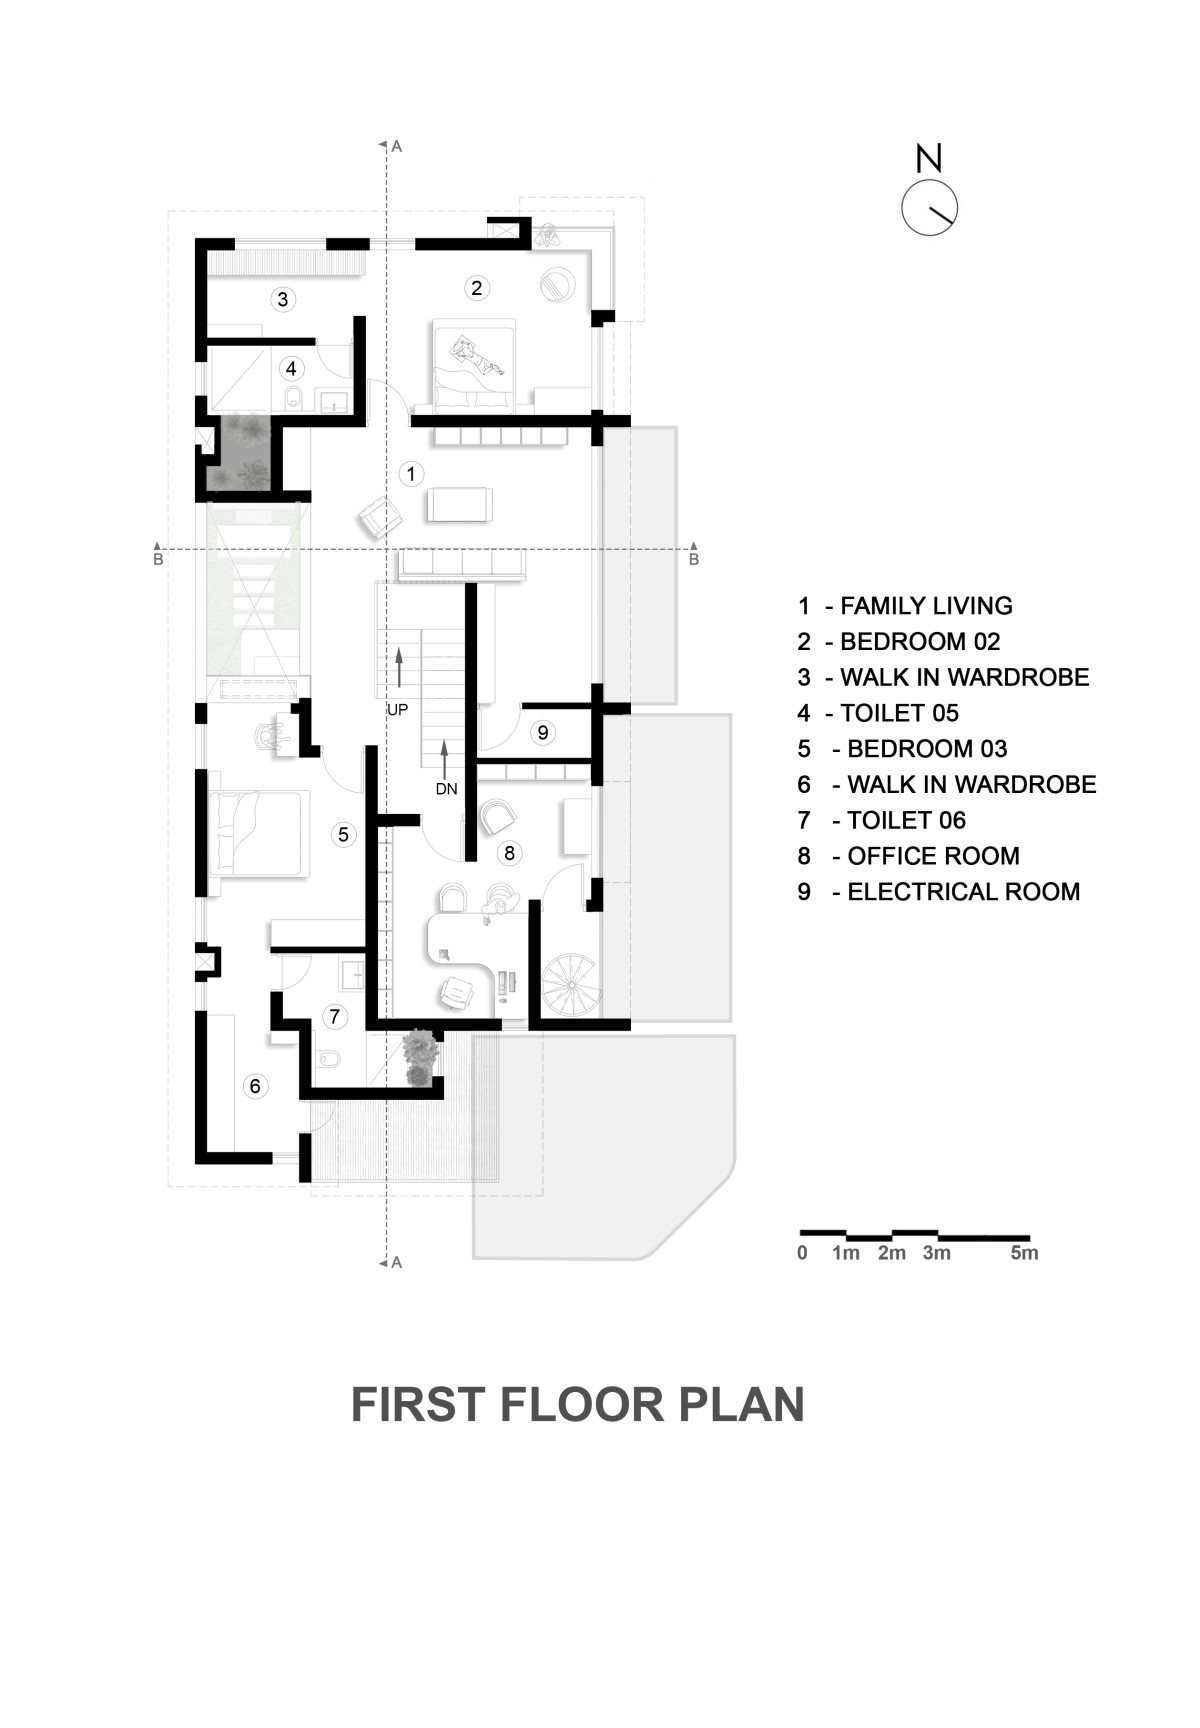 First Floor Plan of Carving a COURT OF QUIETUDE in a Bustling Cityscape by Mudbricks Architects